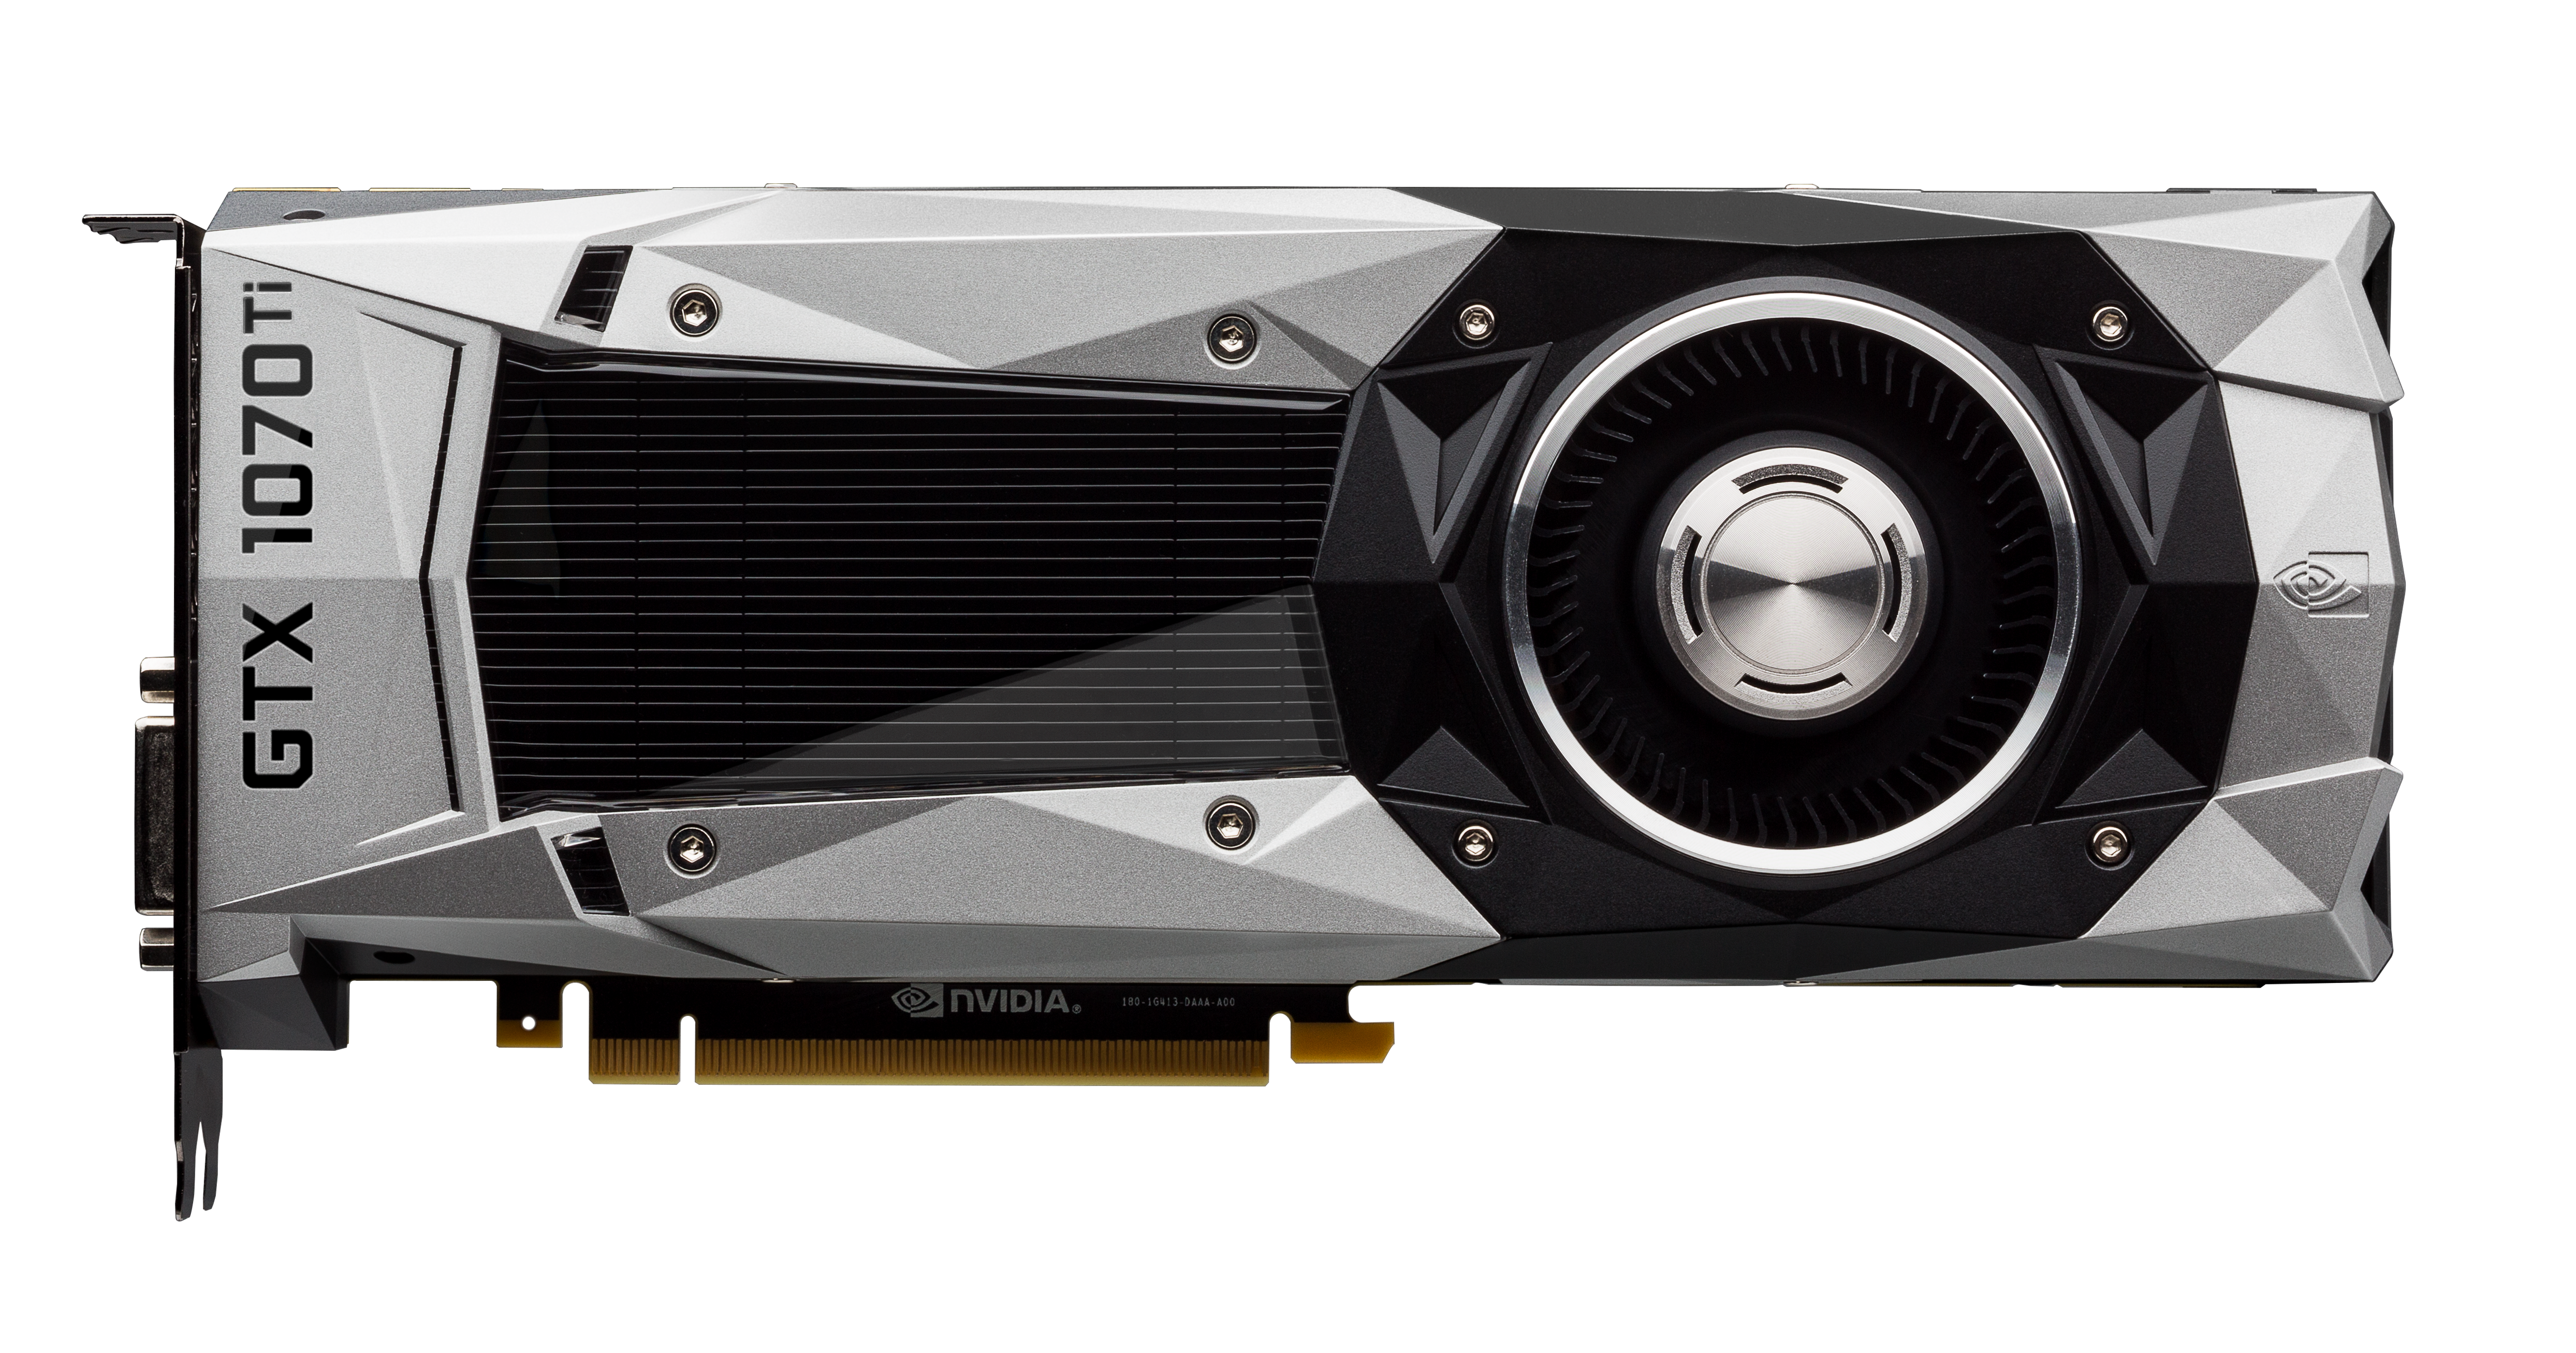 GeForce GTX 1070 Ti Out Now: Tear Through The Latest Games At